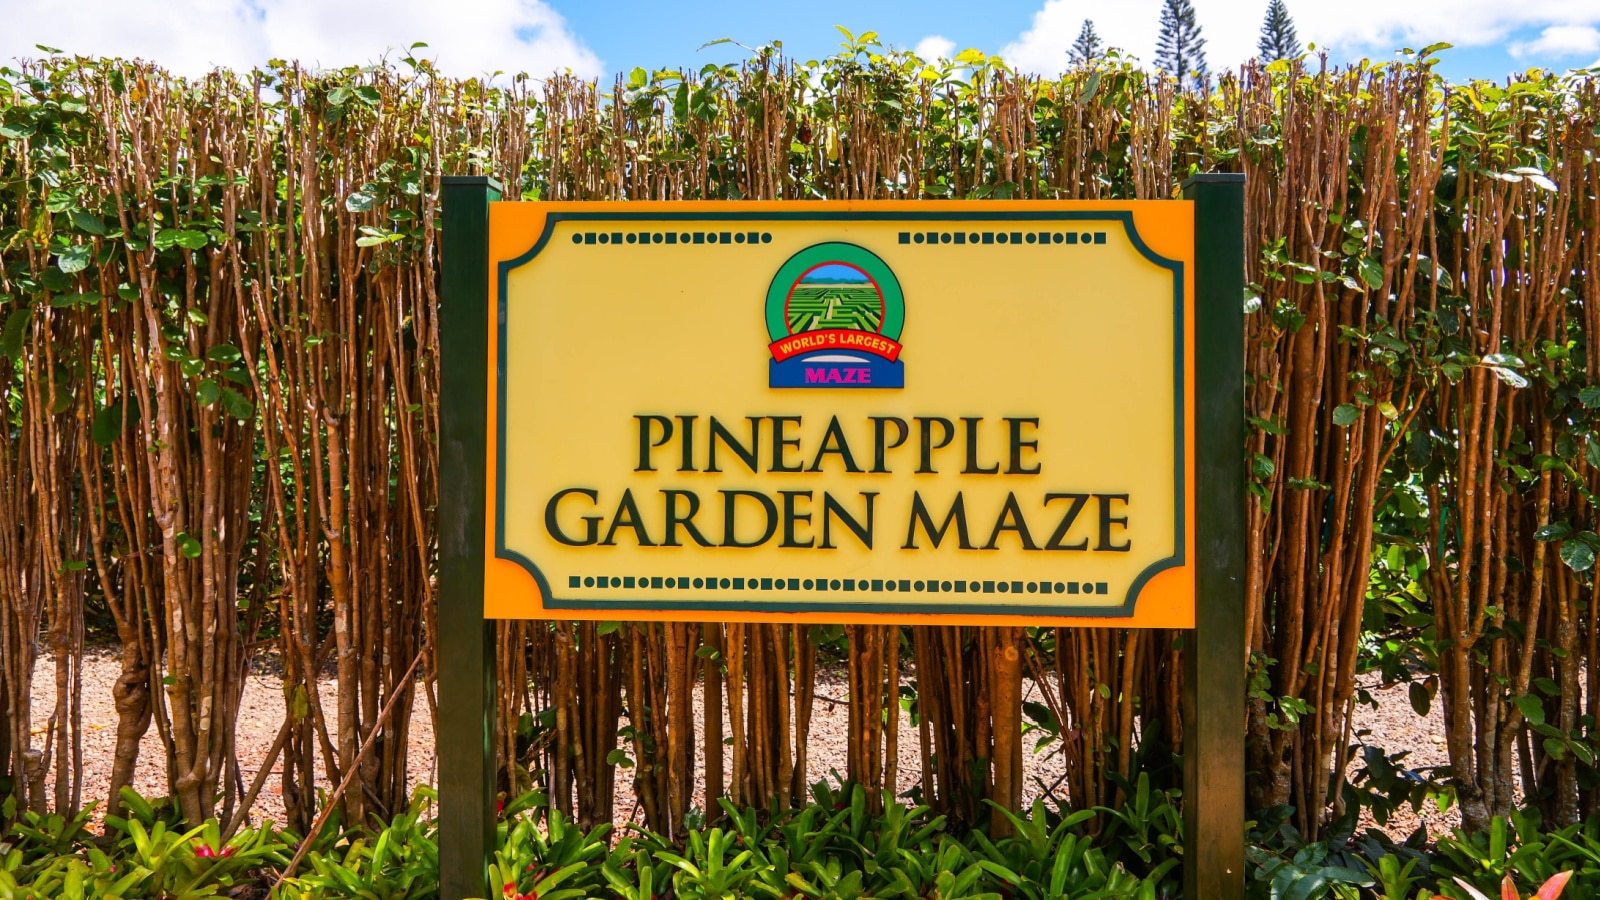 Wahiawa, Hawaii - February 21, 2022 : Pineapple Garden Maze entrance sign at the Dole Pineapple Plantation in the central valley of O'ahu island in Hawaii, USA